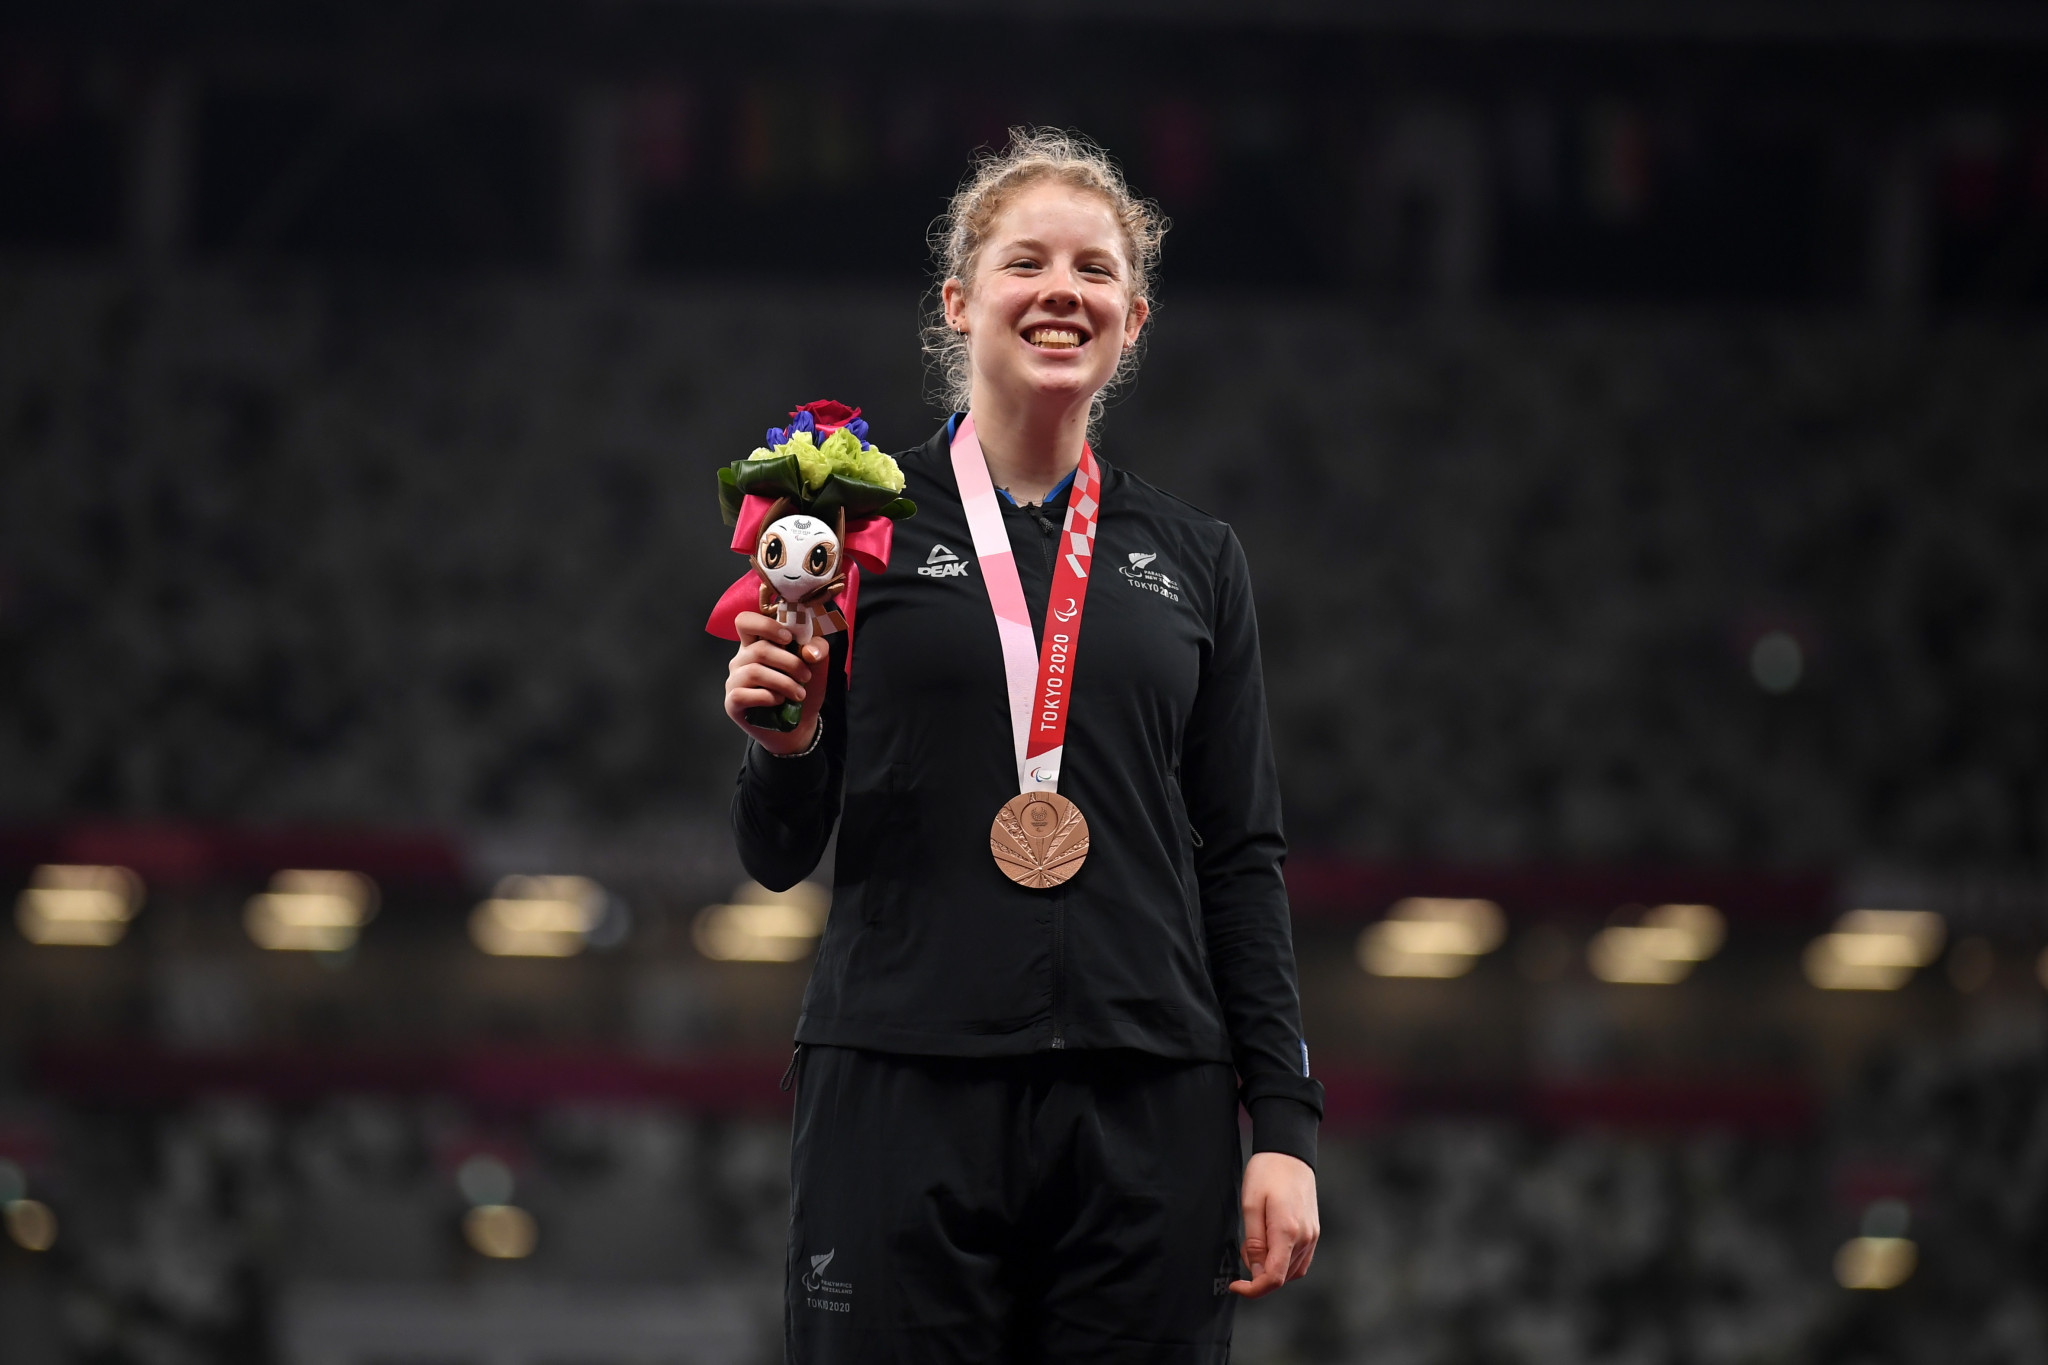 Danielle Aitchison won two medals in Para athletics for New Zealand on her Paralympic debut at Tokyo 2020 ©Getty Images